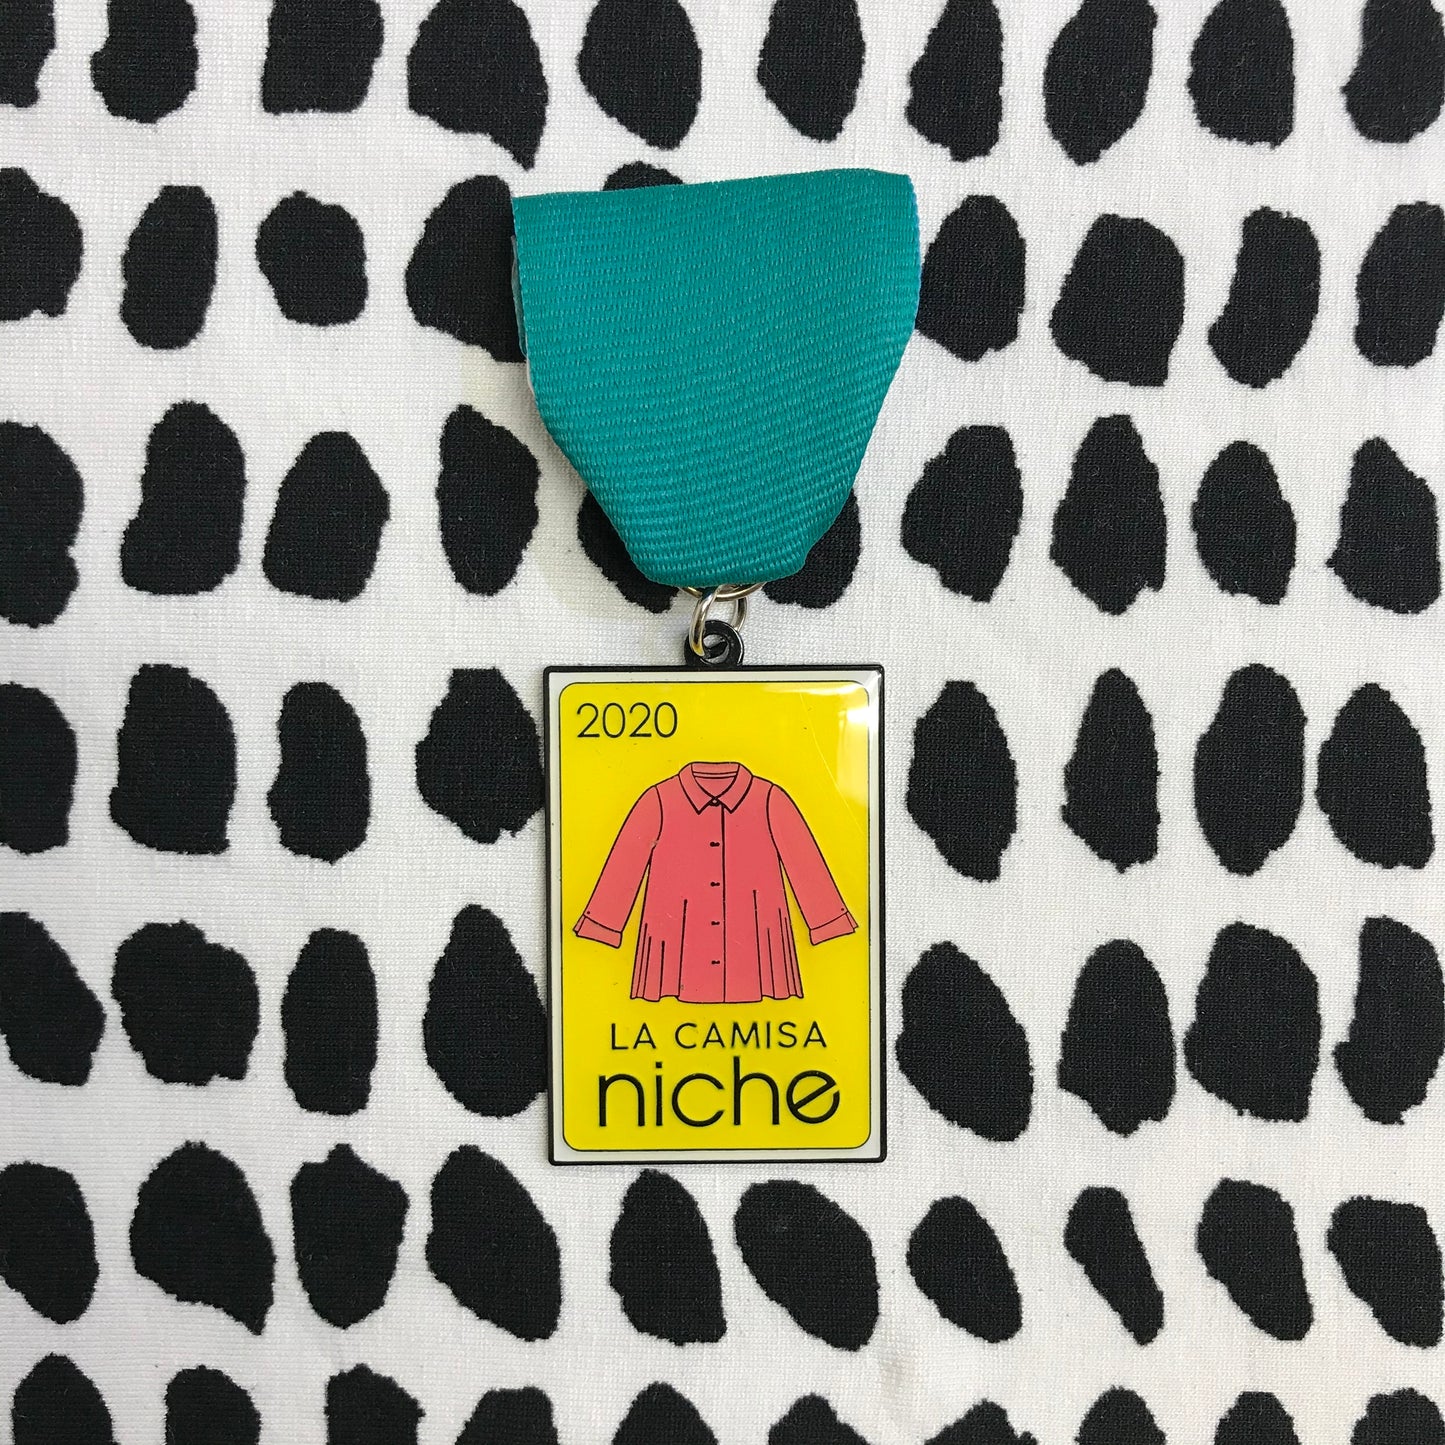 fiesta medal with a teal ribbon on a black and white dot background. The medal is yellow with a coral color blouse and the text "2020" "la camisa" and "niche"